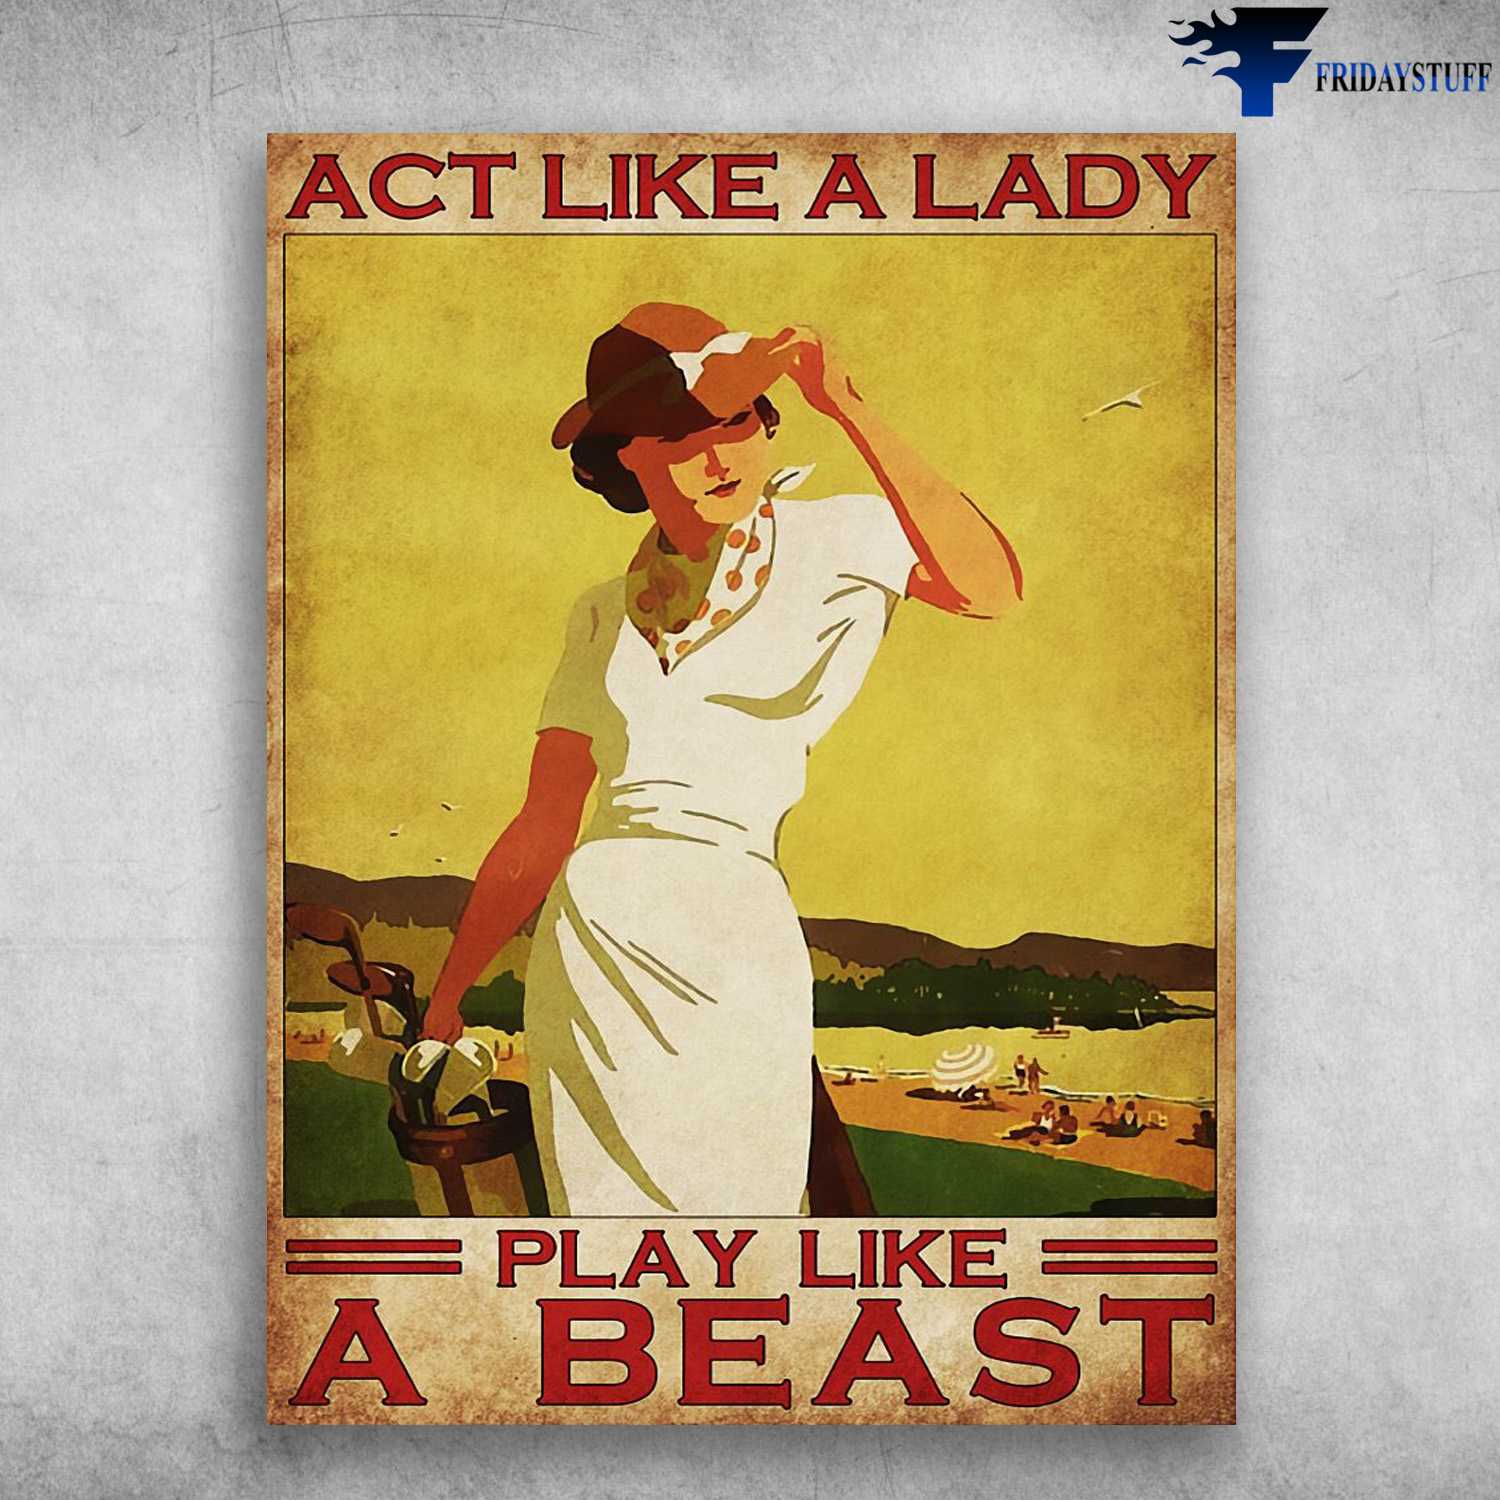 Girl Plays Golf, Golf Poster - Act Like A Lady, Play Like A Beast, Golf Player